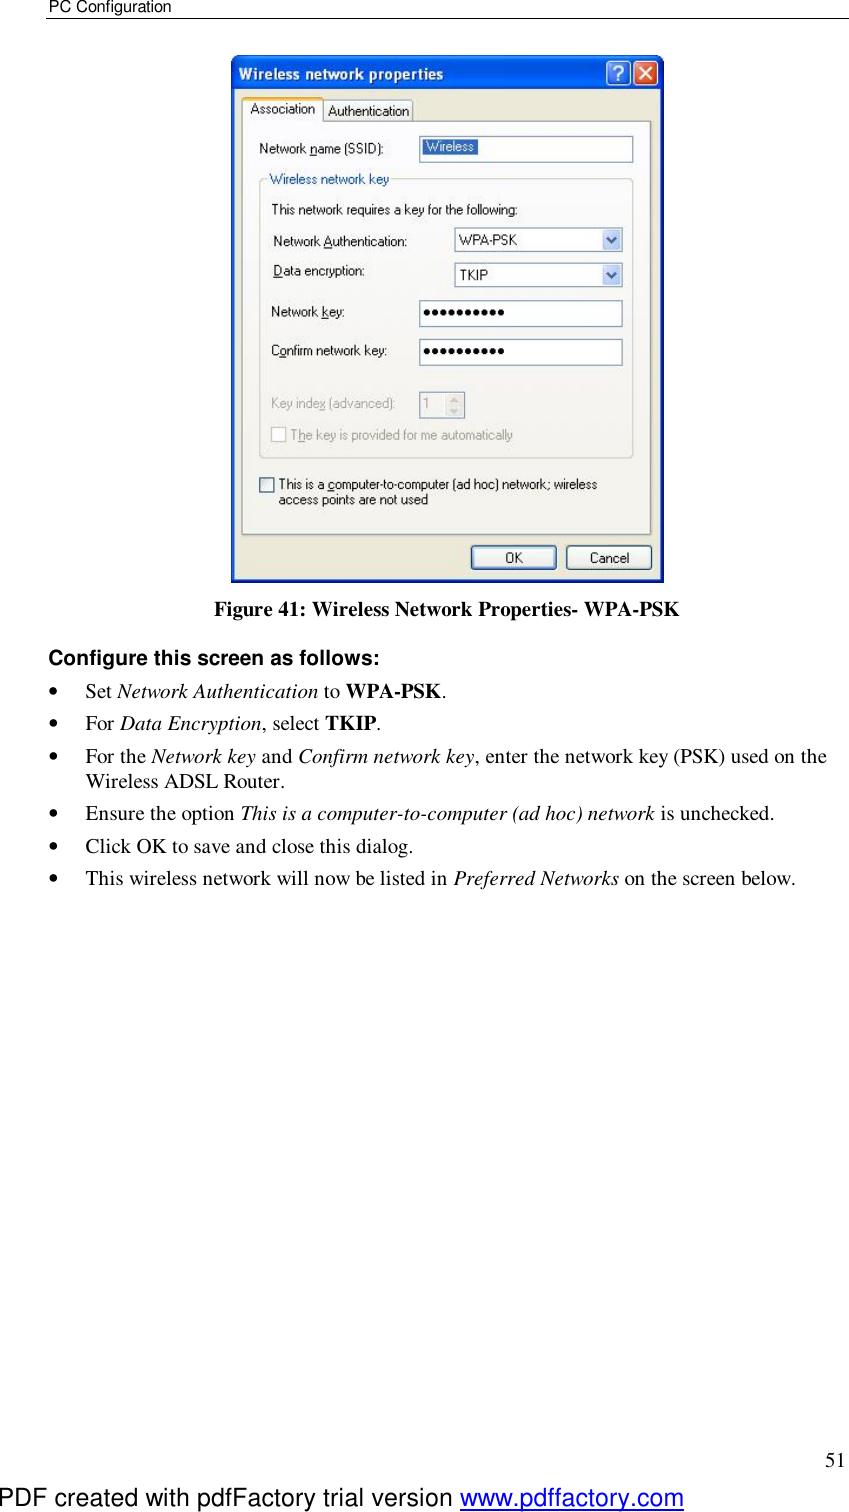 PC Configuration 51  Figure 41: Wireless Network Properties- WPA-PSK Configure this screen as follows: •  Set Network Authentication to WPA-PSK. •  For Data Encryption, select TKIP. •  For the Network key and Confirm network key, enter the network key (PSK) used on the Wireless ADSL Router. •  Ensure the option This is a computer-to-computer (ad hoc) network is unchecked. •  Click OK to save and close this dialog.  •  This wireless network will now be listed in Preferred Networks on the screen below. PDF created with pdfFactory trial version www.pdffactory.com